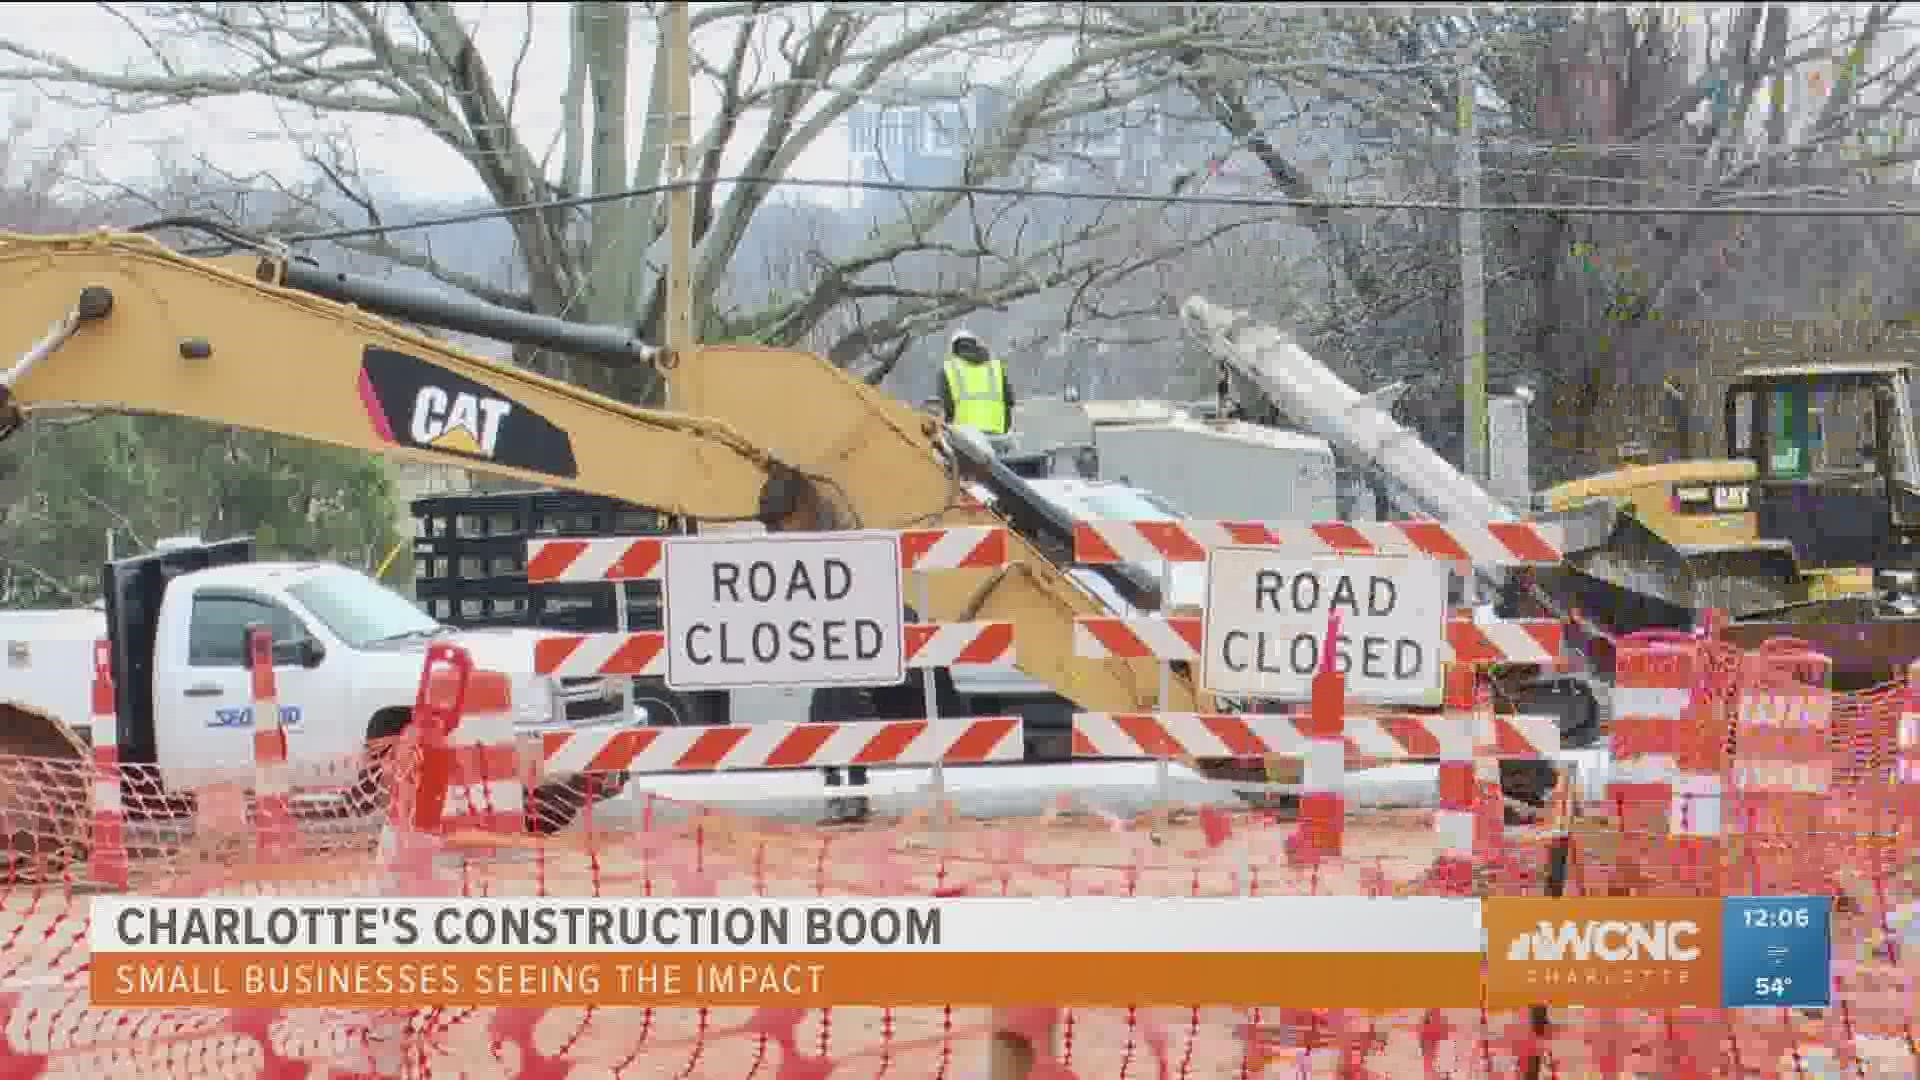 Rampant construction and delays are impacting small businesses that rely on foot traffic.